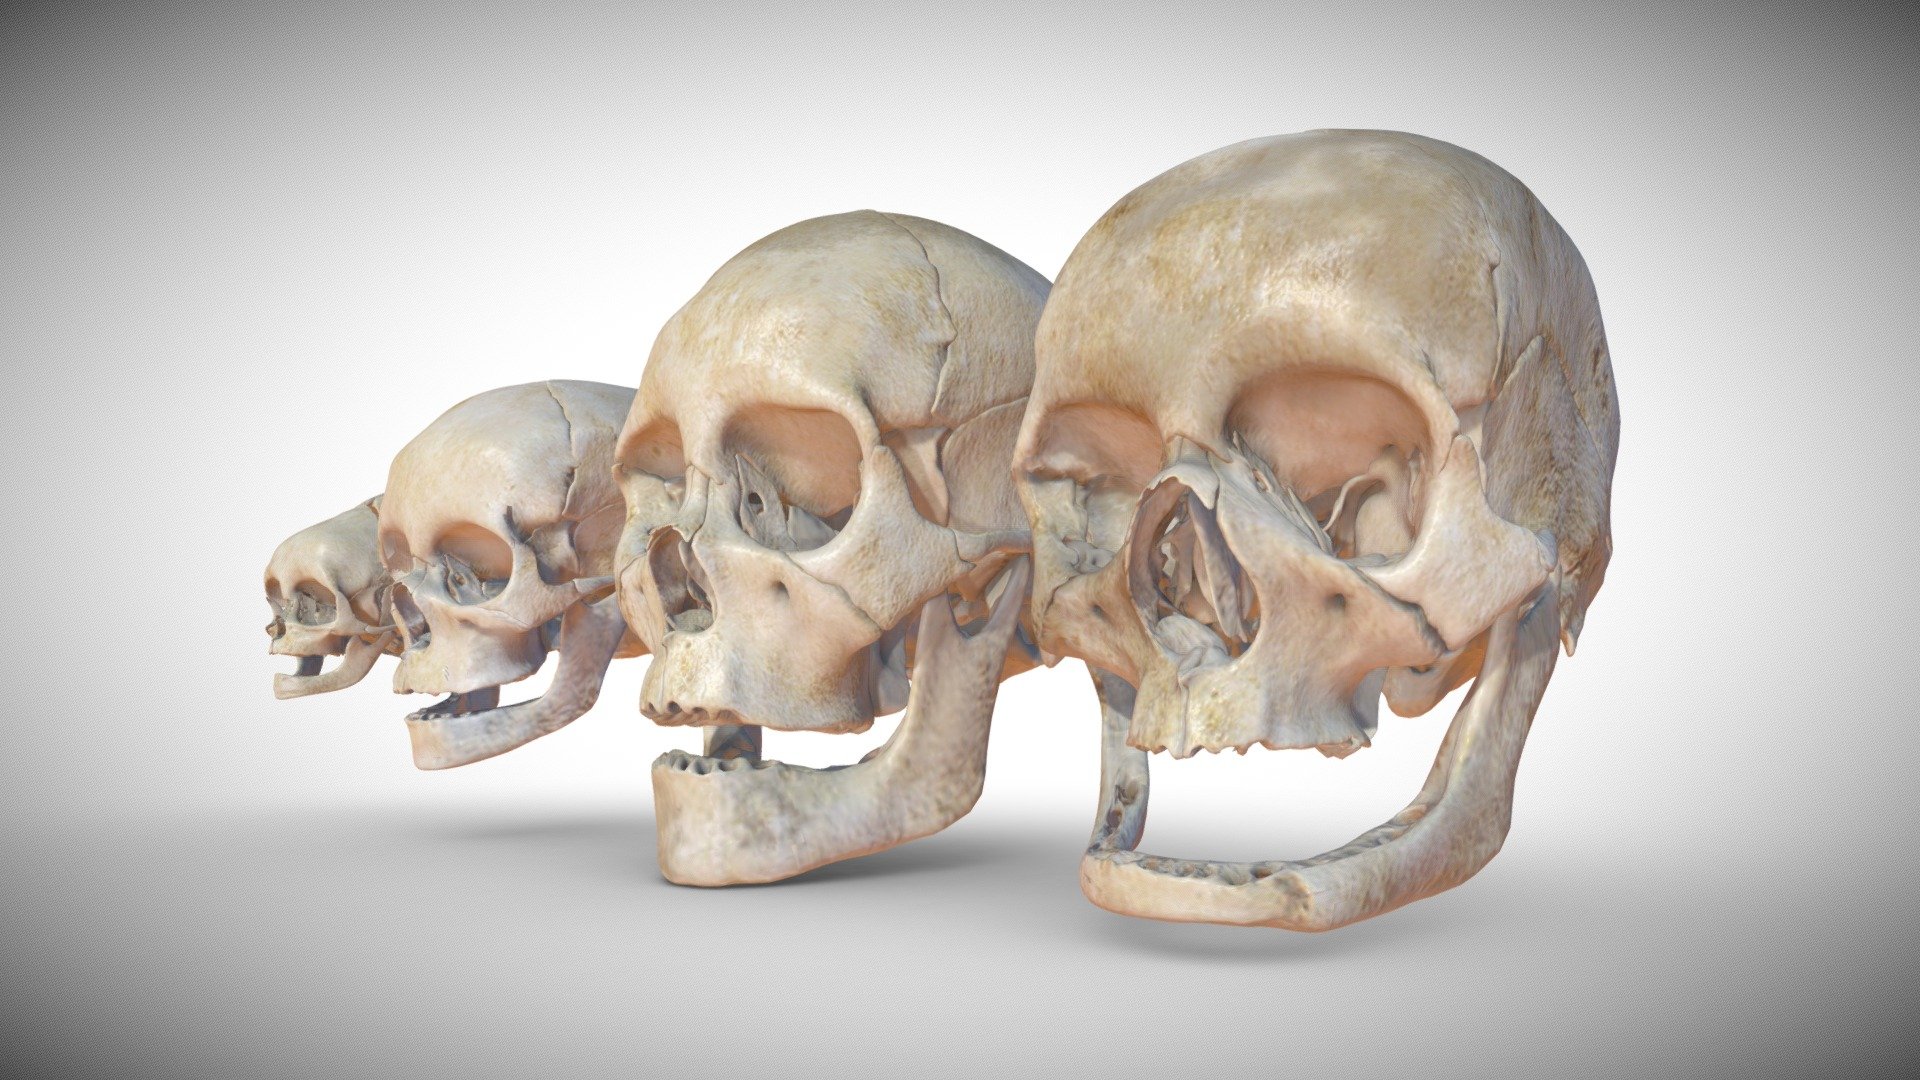 Age Based Skulls
These are four stages model showing the significant changes in the skull structure over the aging process of the human being.

Medical Notes:

The models are medically accurate of ages: 0,8,35,80 respectively, each age consists of 20 bone (object)

1.Left Zygomatic

2.Mandible

3.Left Temporal

4.Left Palatine

5.Left Nasal

6.Left Maxilla

7.Left Lacrimal

8.Inferior Conchae

9.Left Parietal

10.Right Parietal

11.Ethmoid

12.Vomer

13.Sphenoid

14.Right Zygomatic

15.Frontalis

16.Right Temporal

17.Right Palatine

18.Right Nasal

19.Right Maxilla

20.Right Lacrimal

Technical Notes:


Every bone in the skull is separate and can be moved/rotated/scaled.

Soon it will be available  in the store section. 

You can always contact us for custom made model or animation.

Hope you like it… - Age Based Skulls - Buy Royalty Free 3D model by Sets & Kits (@Setsandkits) 3d model